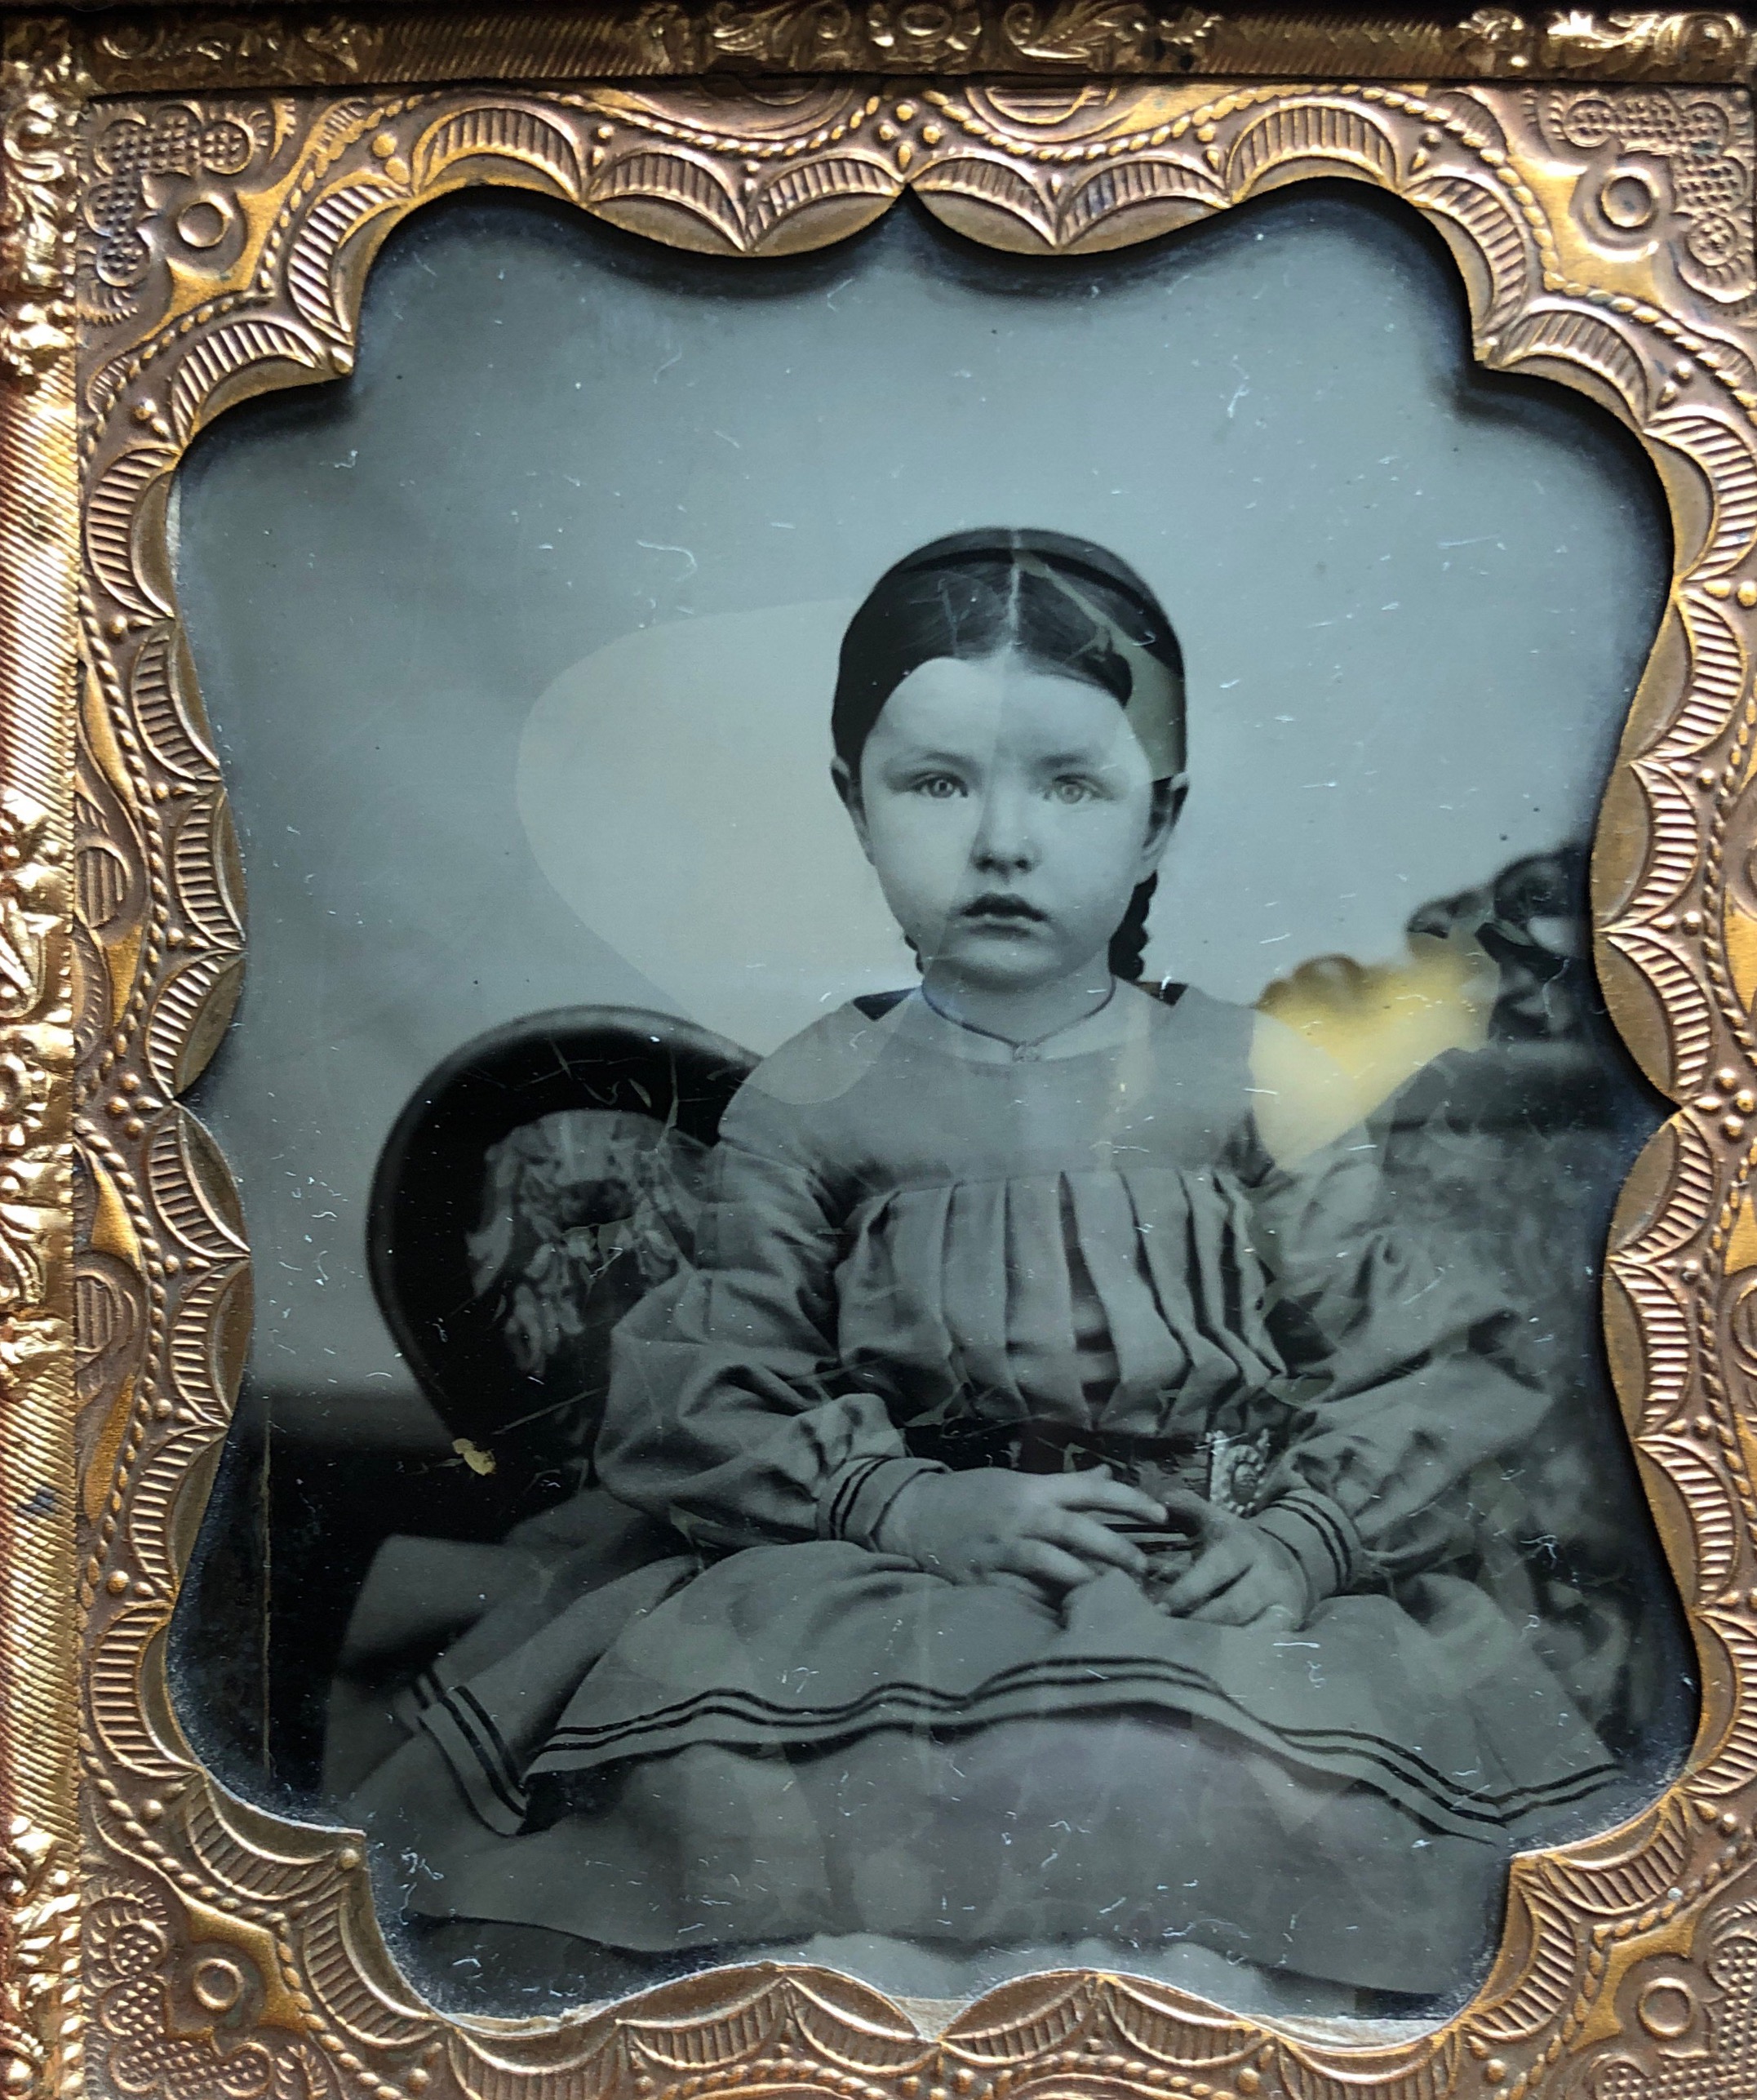 Alice Pinney, Great Great grandmother of Louise Harwood Crowley, Susan Harwood, daughters of Wynette Brown and Martin Harwood. 
The ambrotype image was introduced in the 1850s. 